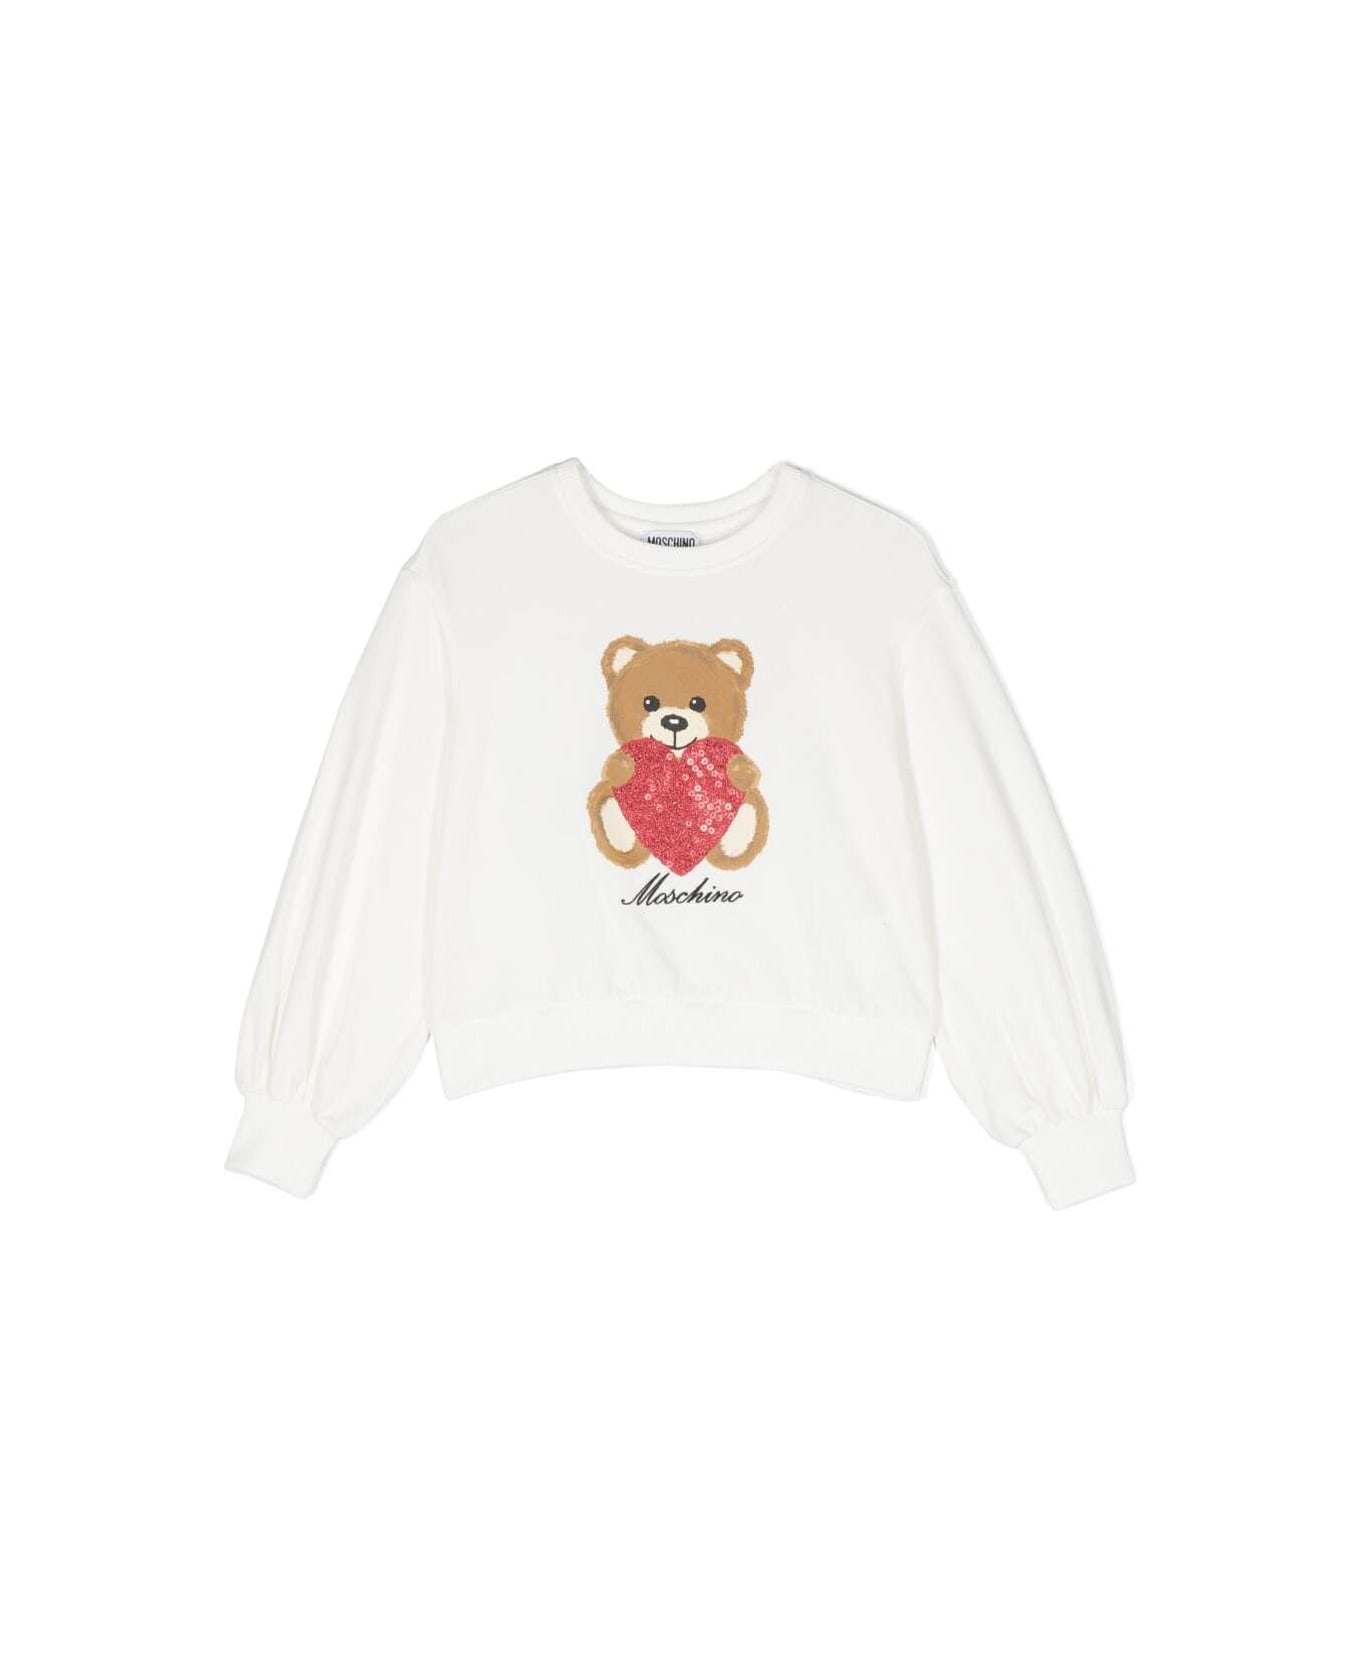 Moschino White Sweatshirt With Pailletes Print And Embroidered Logo At The Front In Cotton Girl - Cloud ニットウェア＆スウェットシャツ